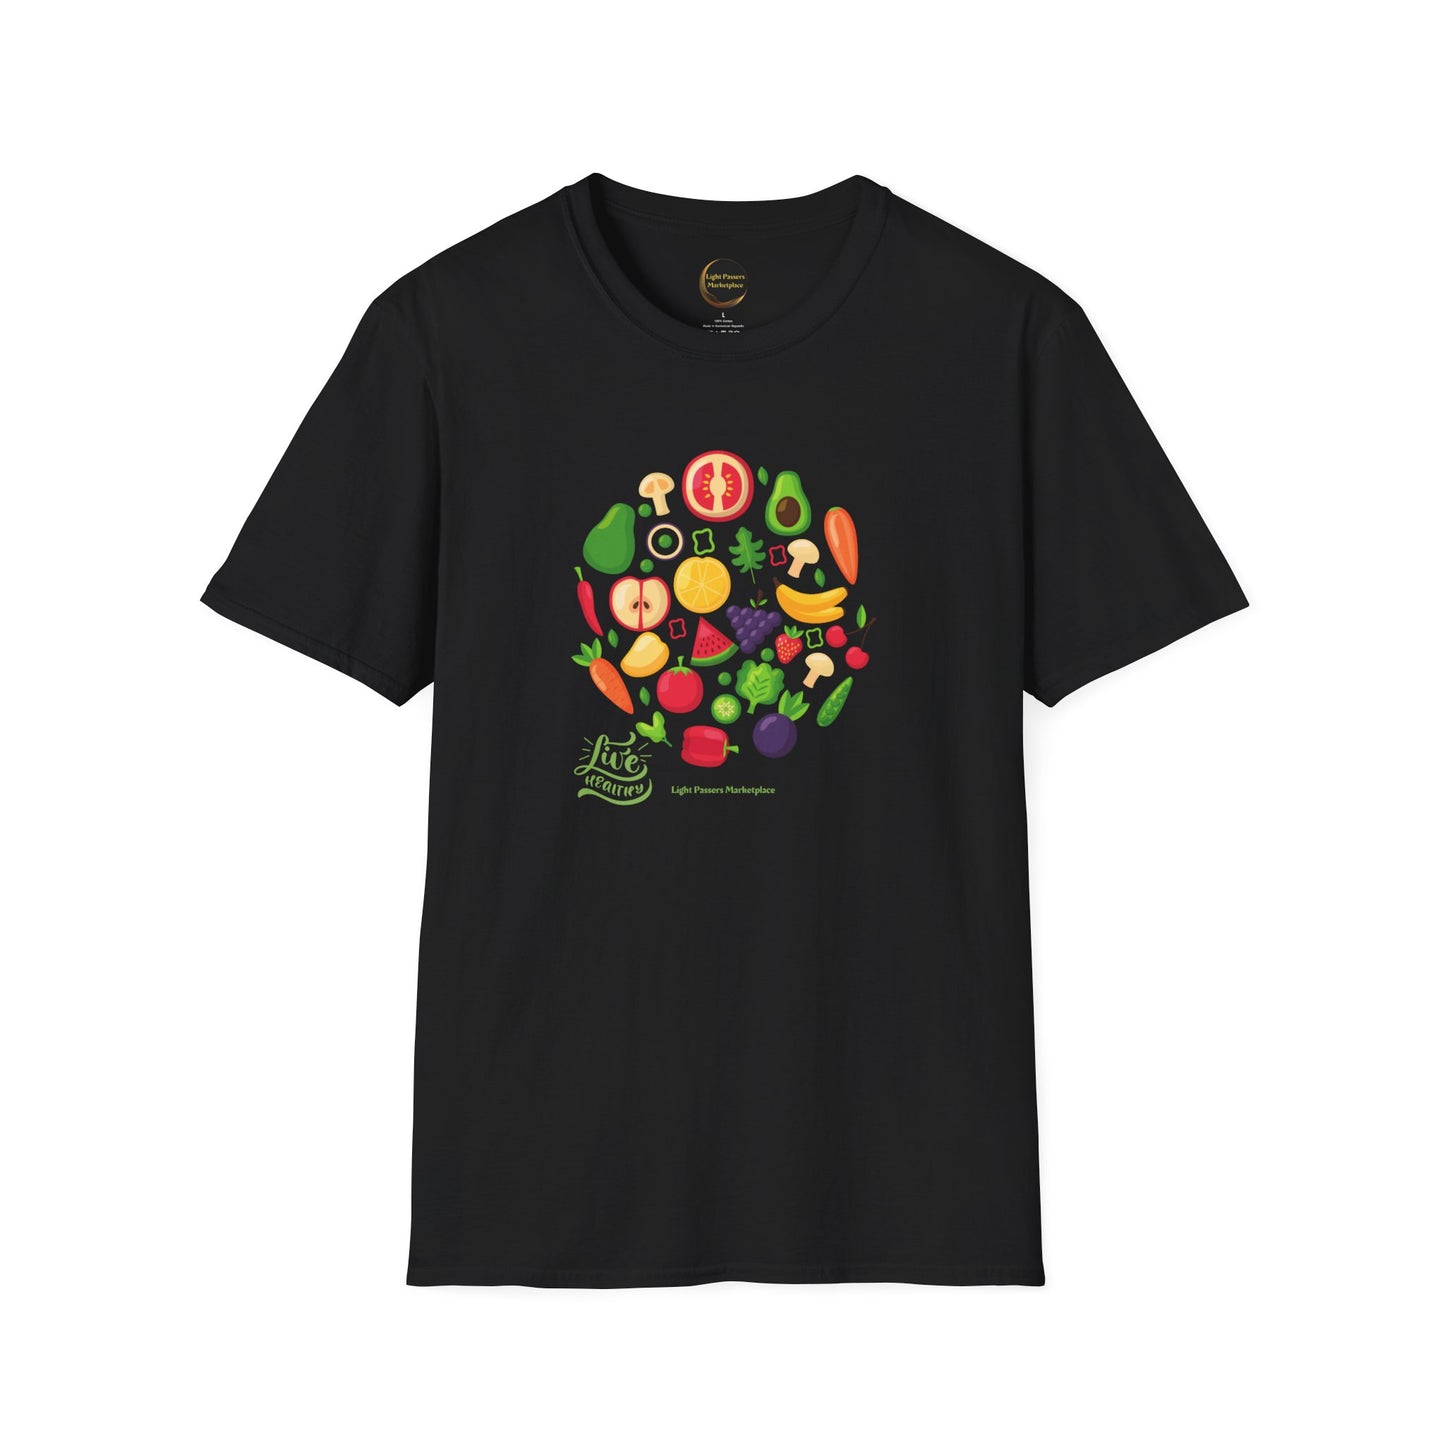 Light Passers Marketplace Live Healthy Unisex Softstyle T-Shirt, Nutrition